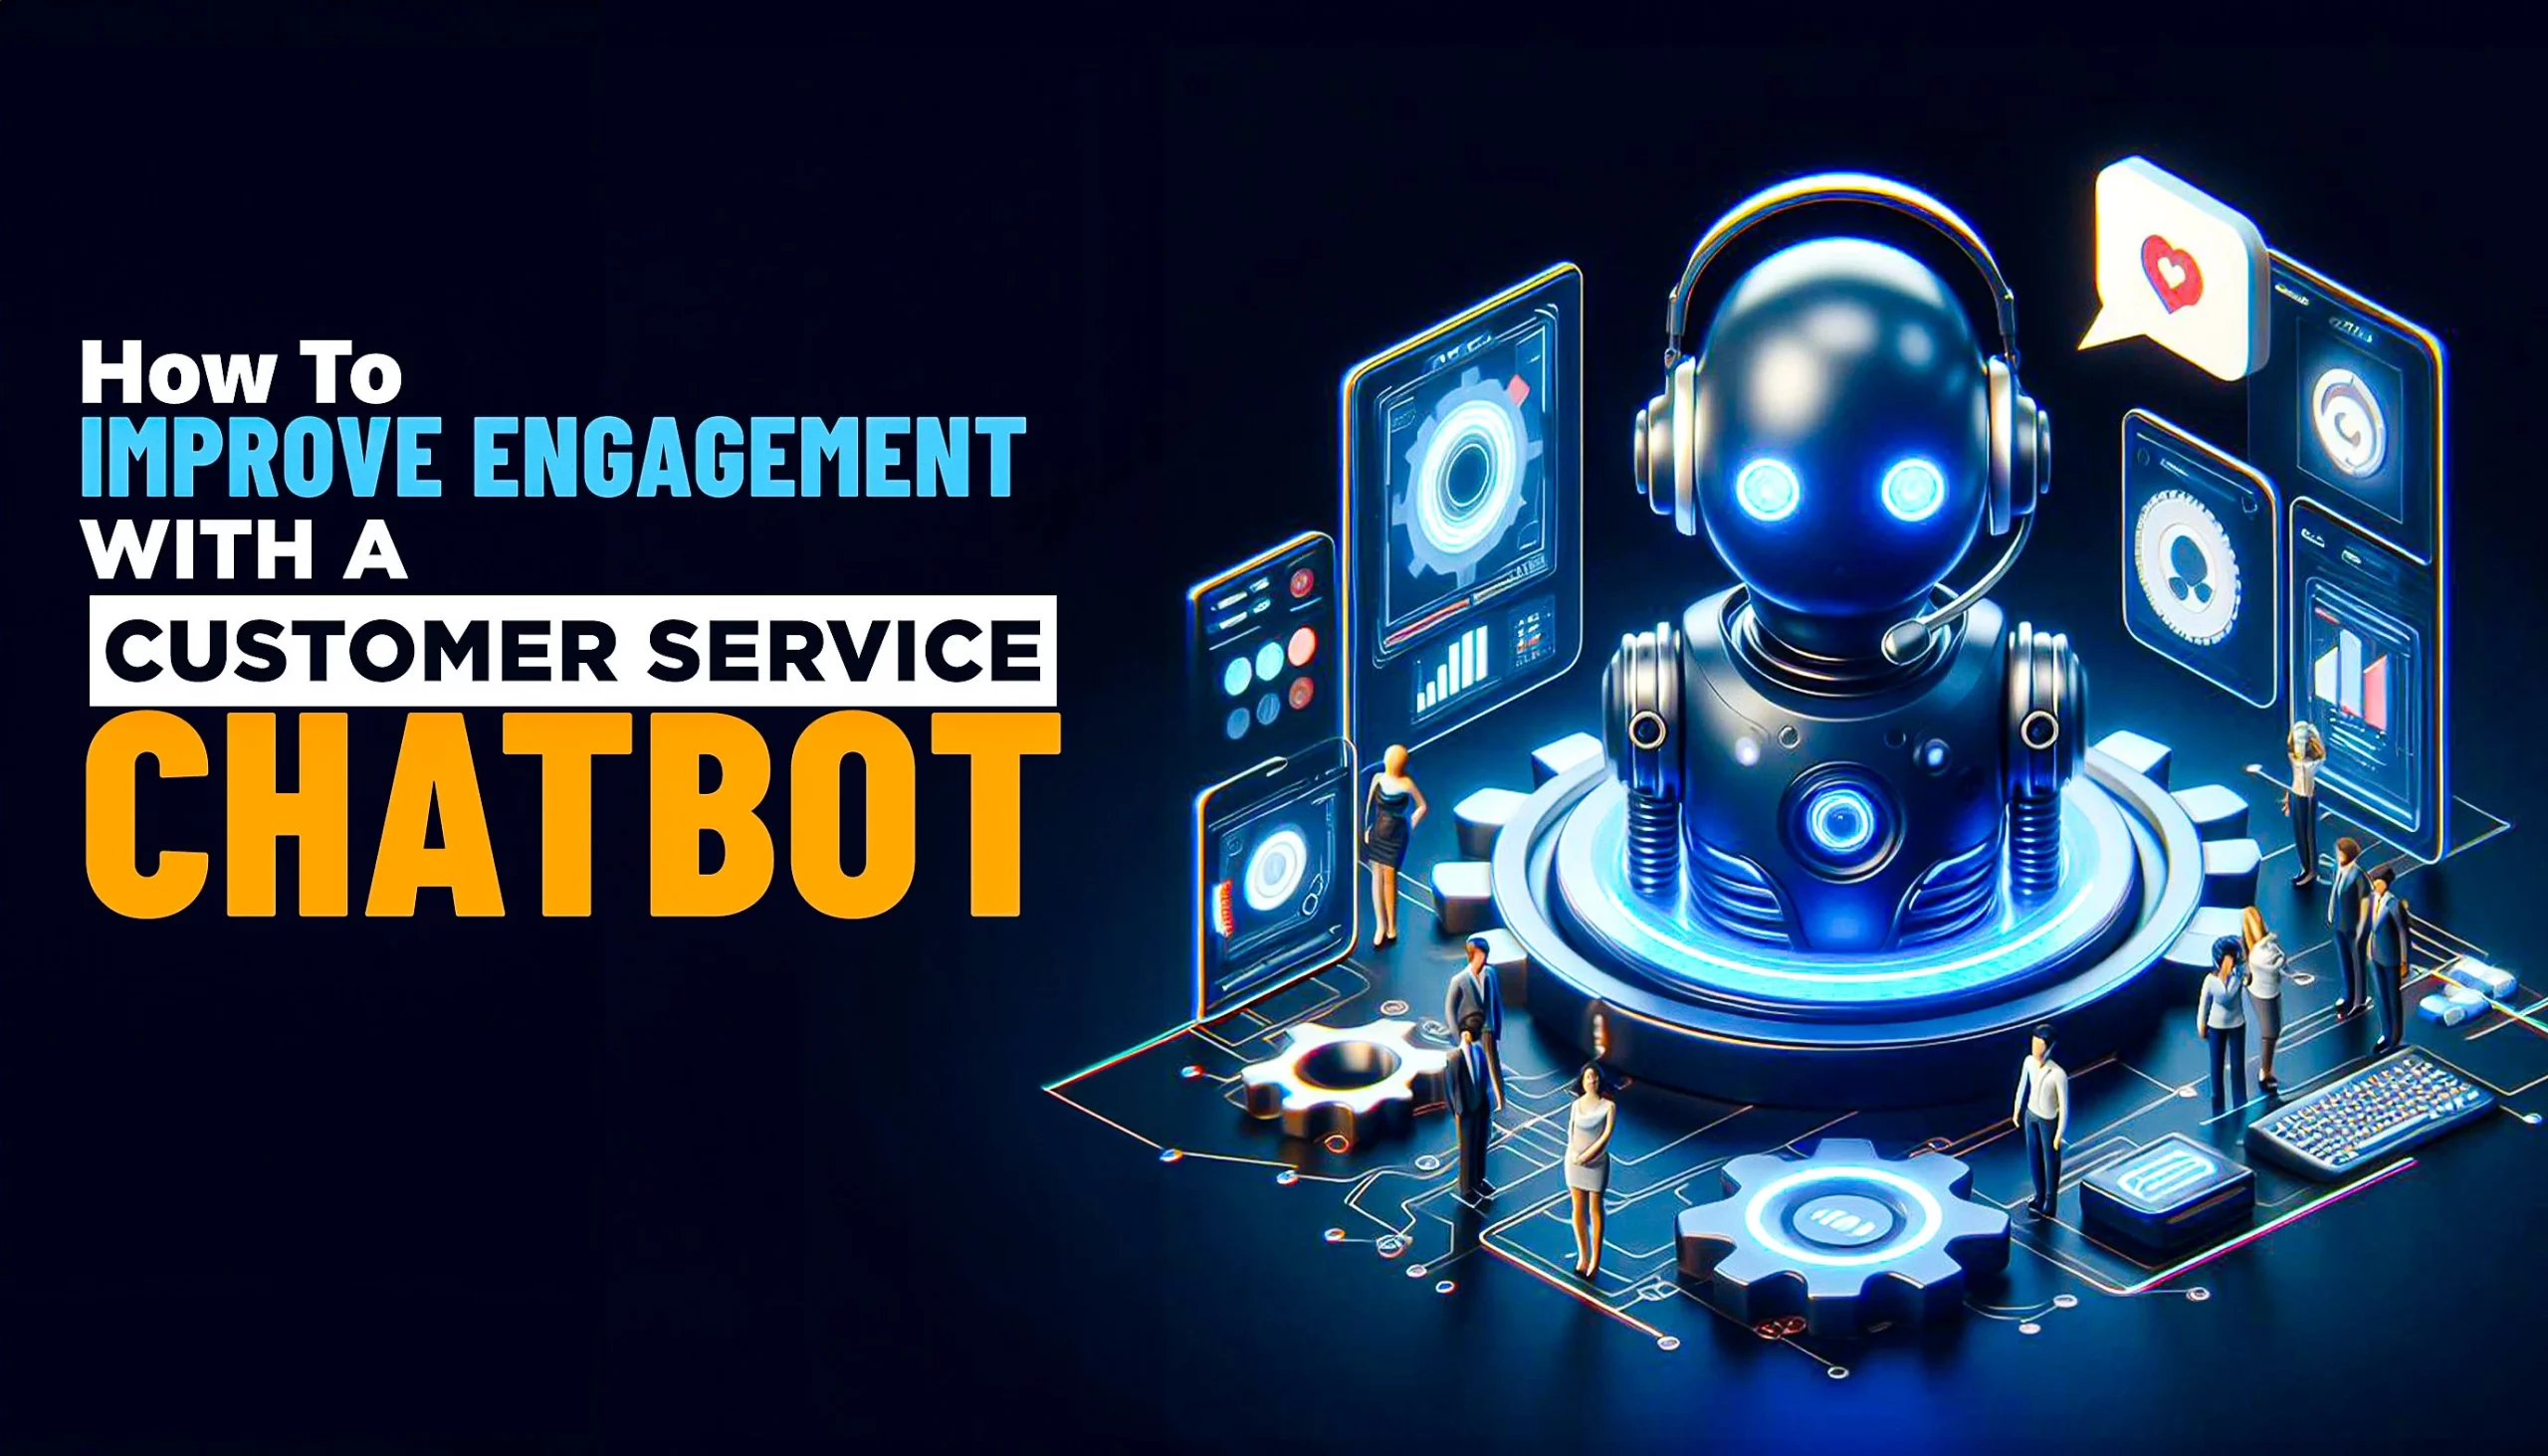 How-to-Improve-Engagement-With-a-Customer-Service-Chatbot